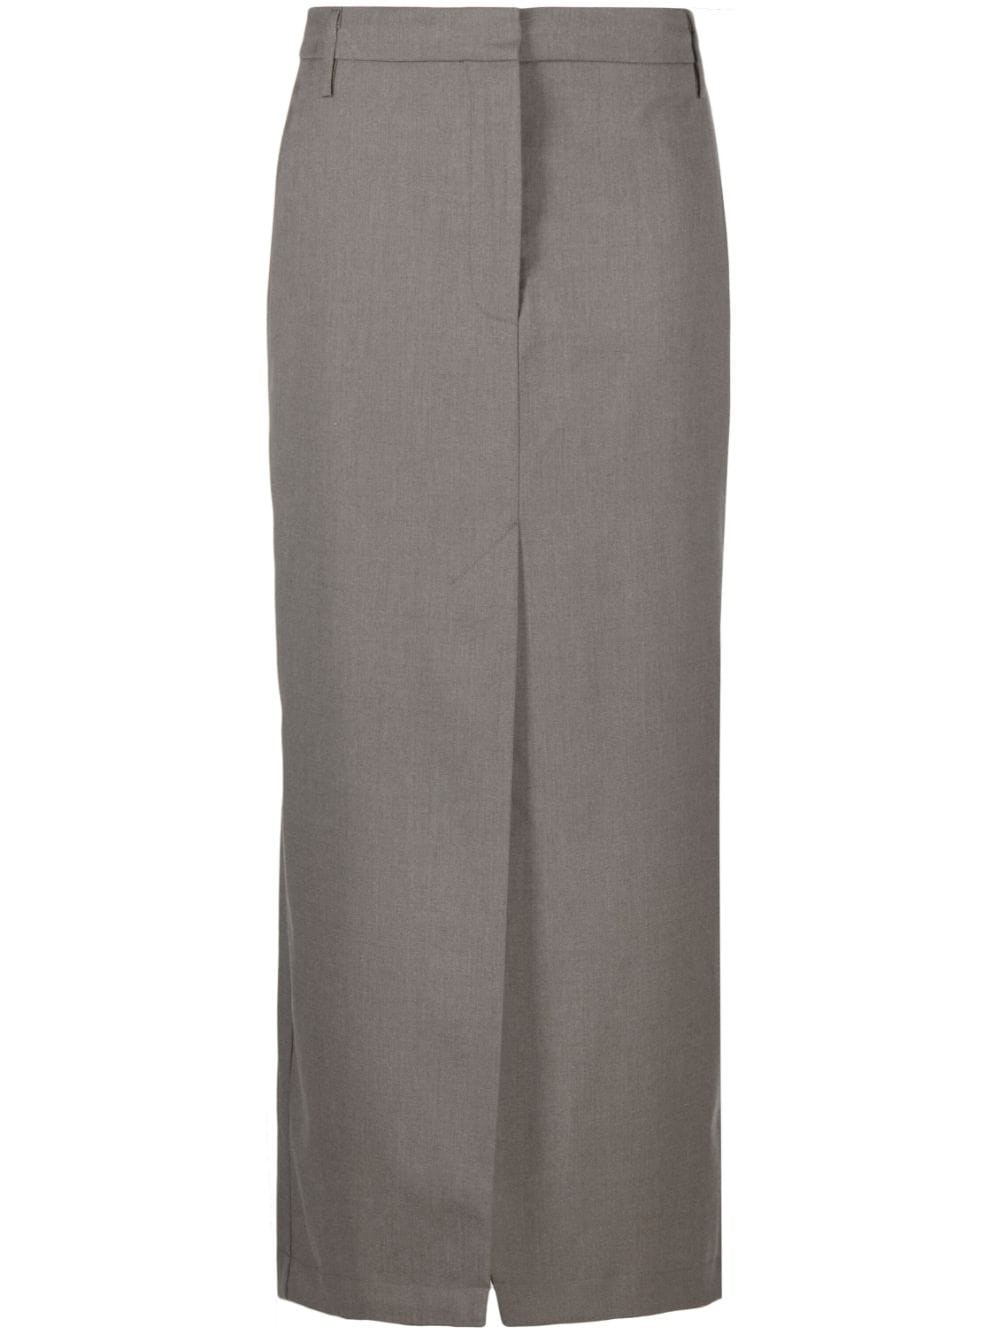 REMAIN PENCIL SKIRT WITH SLIT